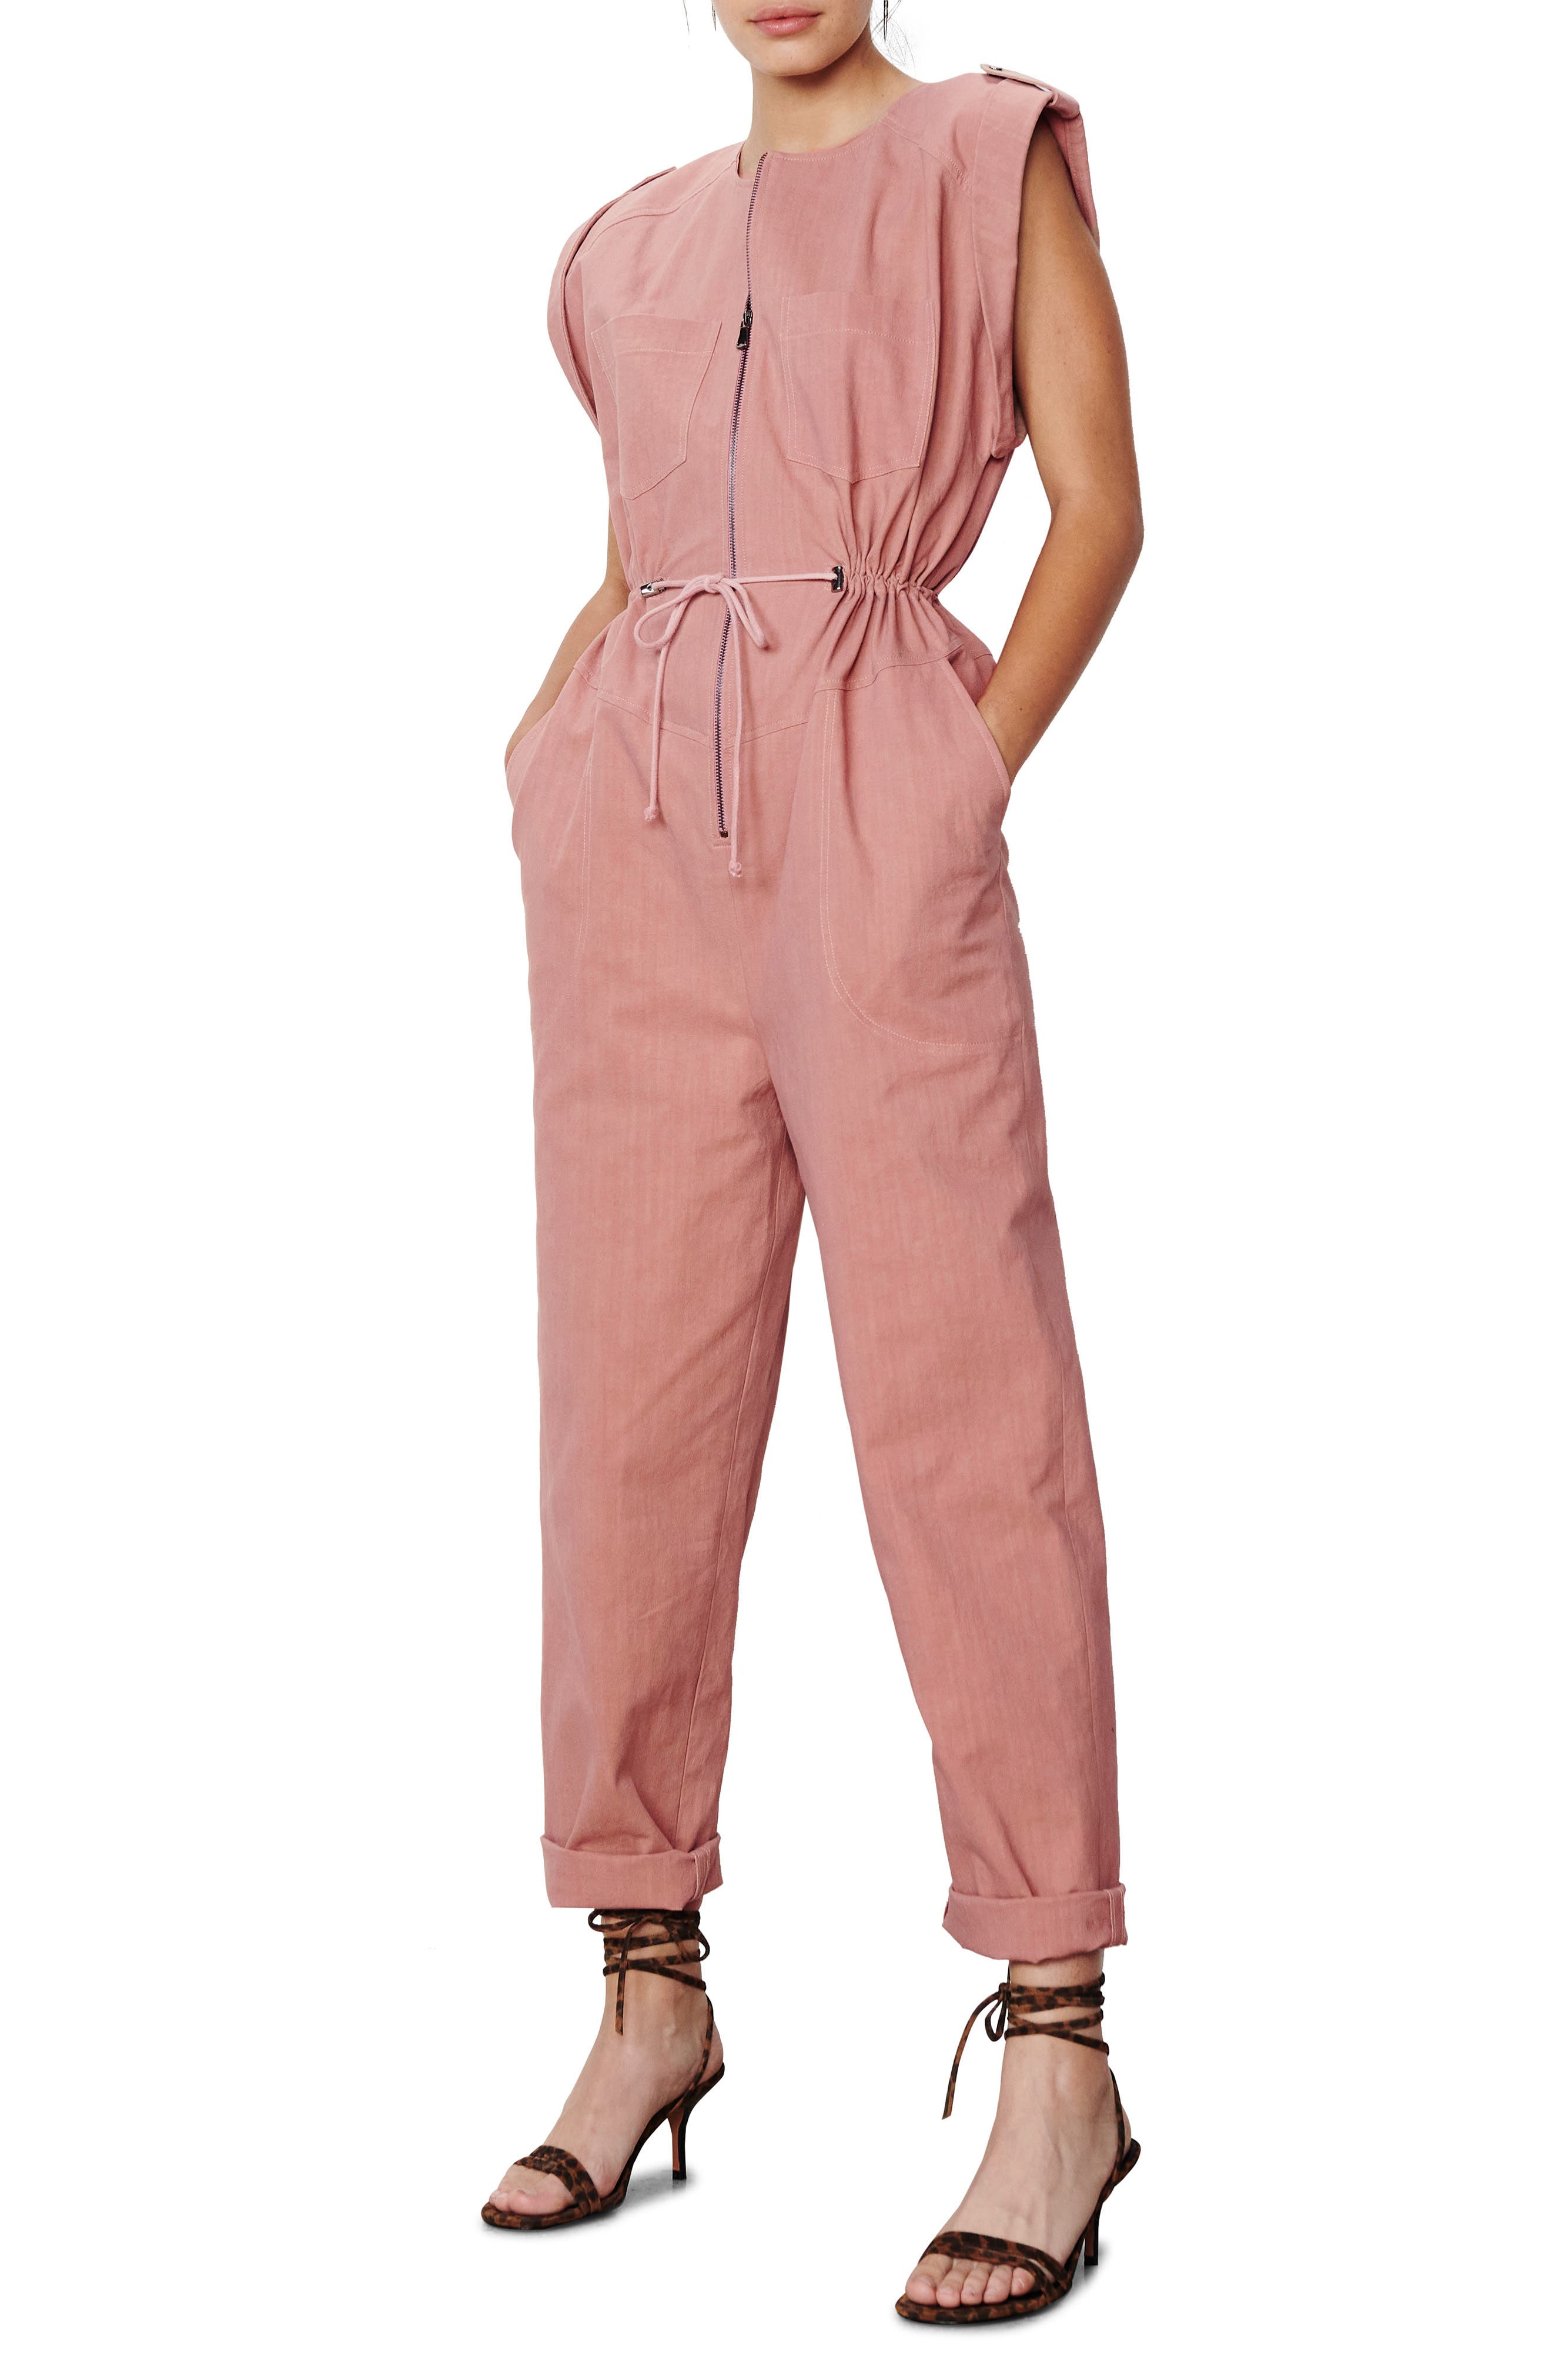 HEFASDM Womens Crew Neck Pure Color with Belt Rompers Jumpsuits Shorts